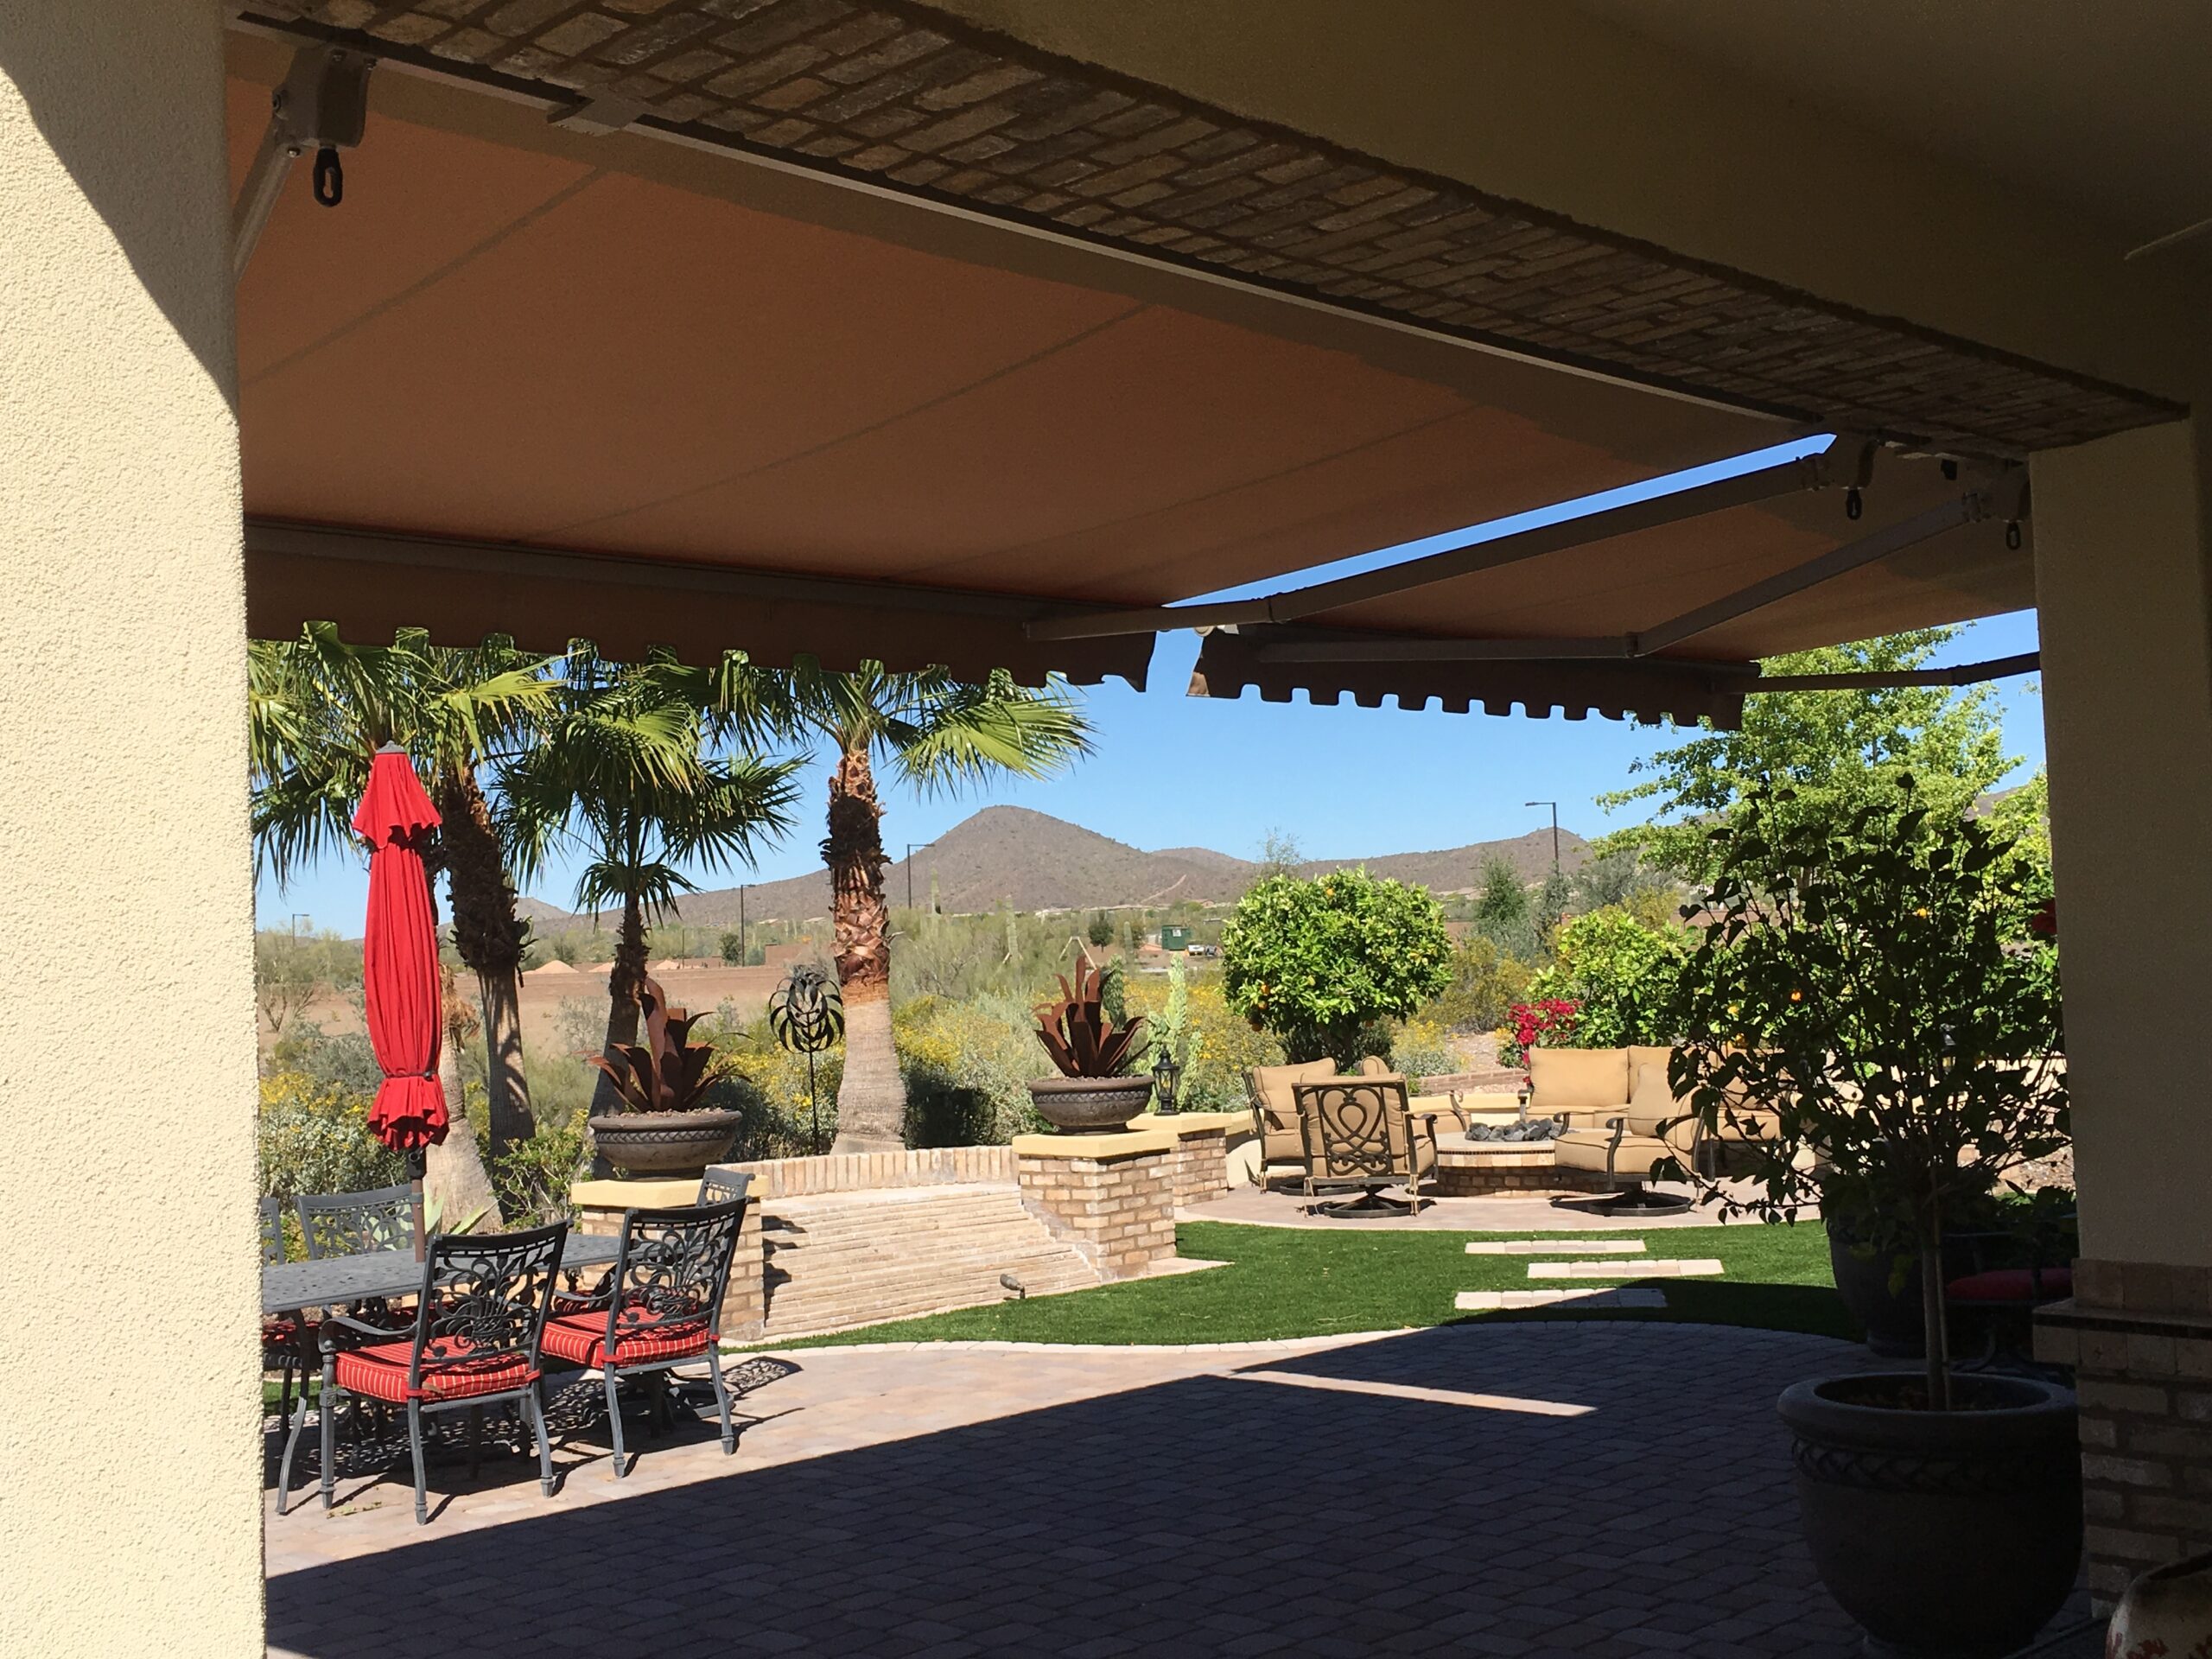 How to Pick the Right Retractable Awning